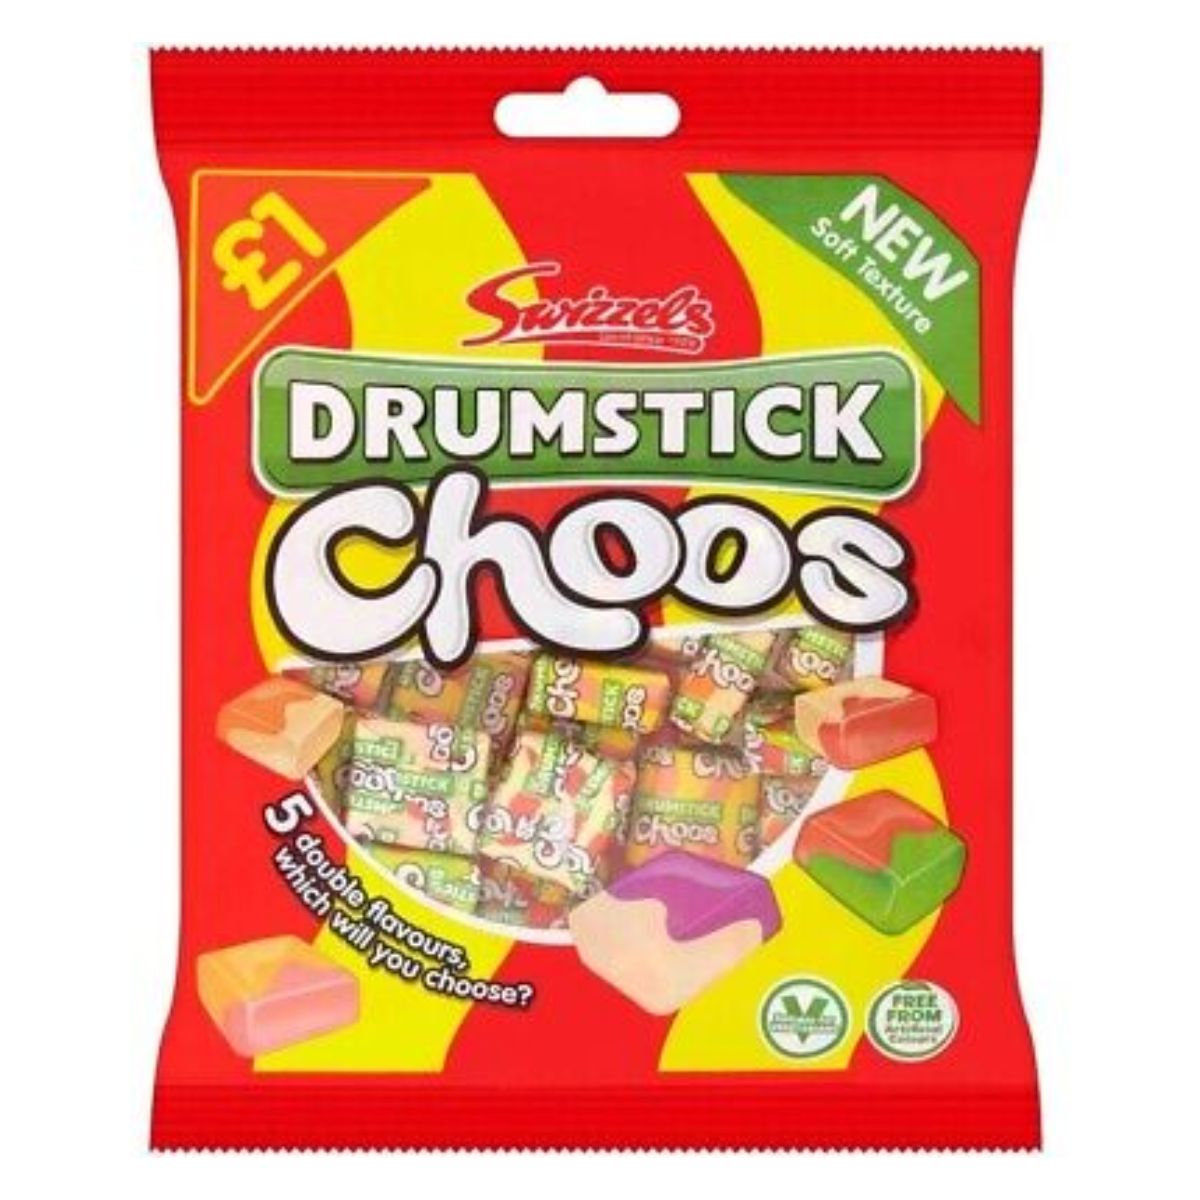 A package of Swizzels - Drumstick Choos Sharing Bag candy displaying five different flavors, priced at £1, and labeled as new.